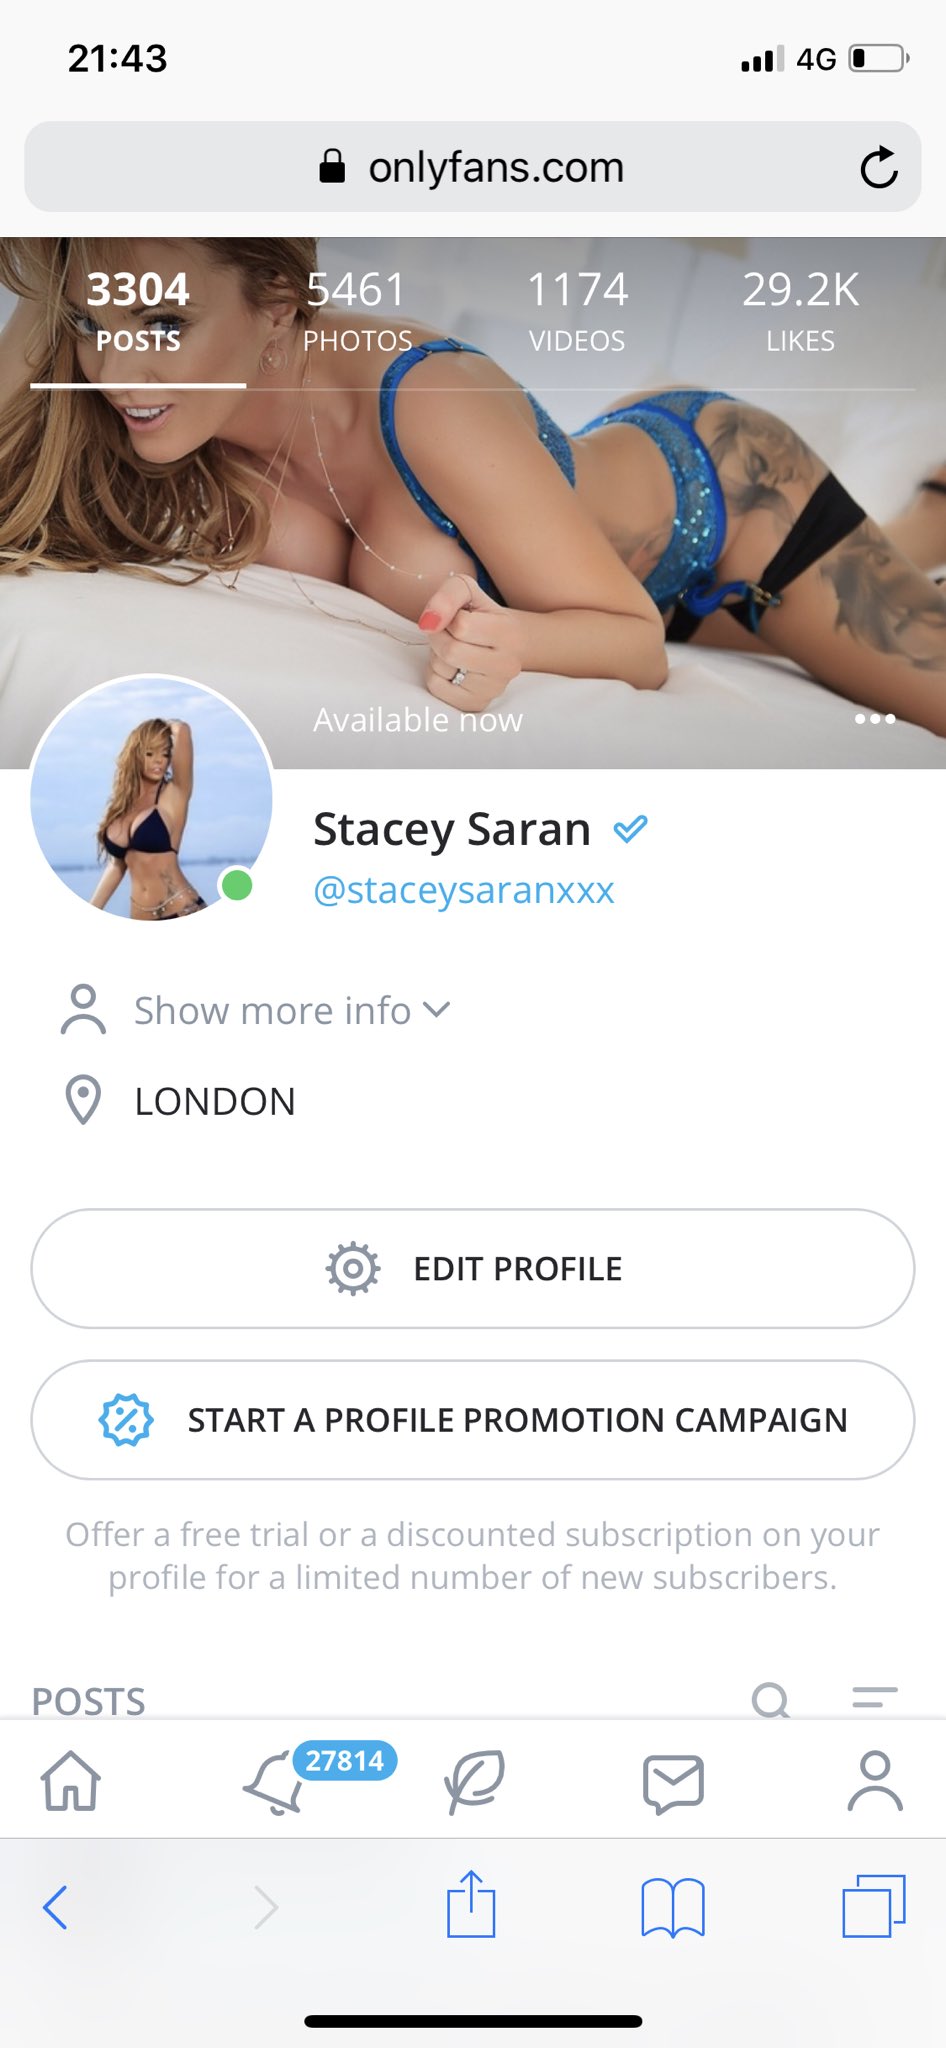 Onlyfans posts